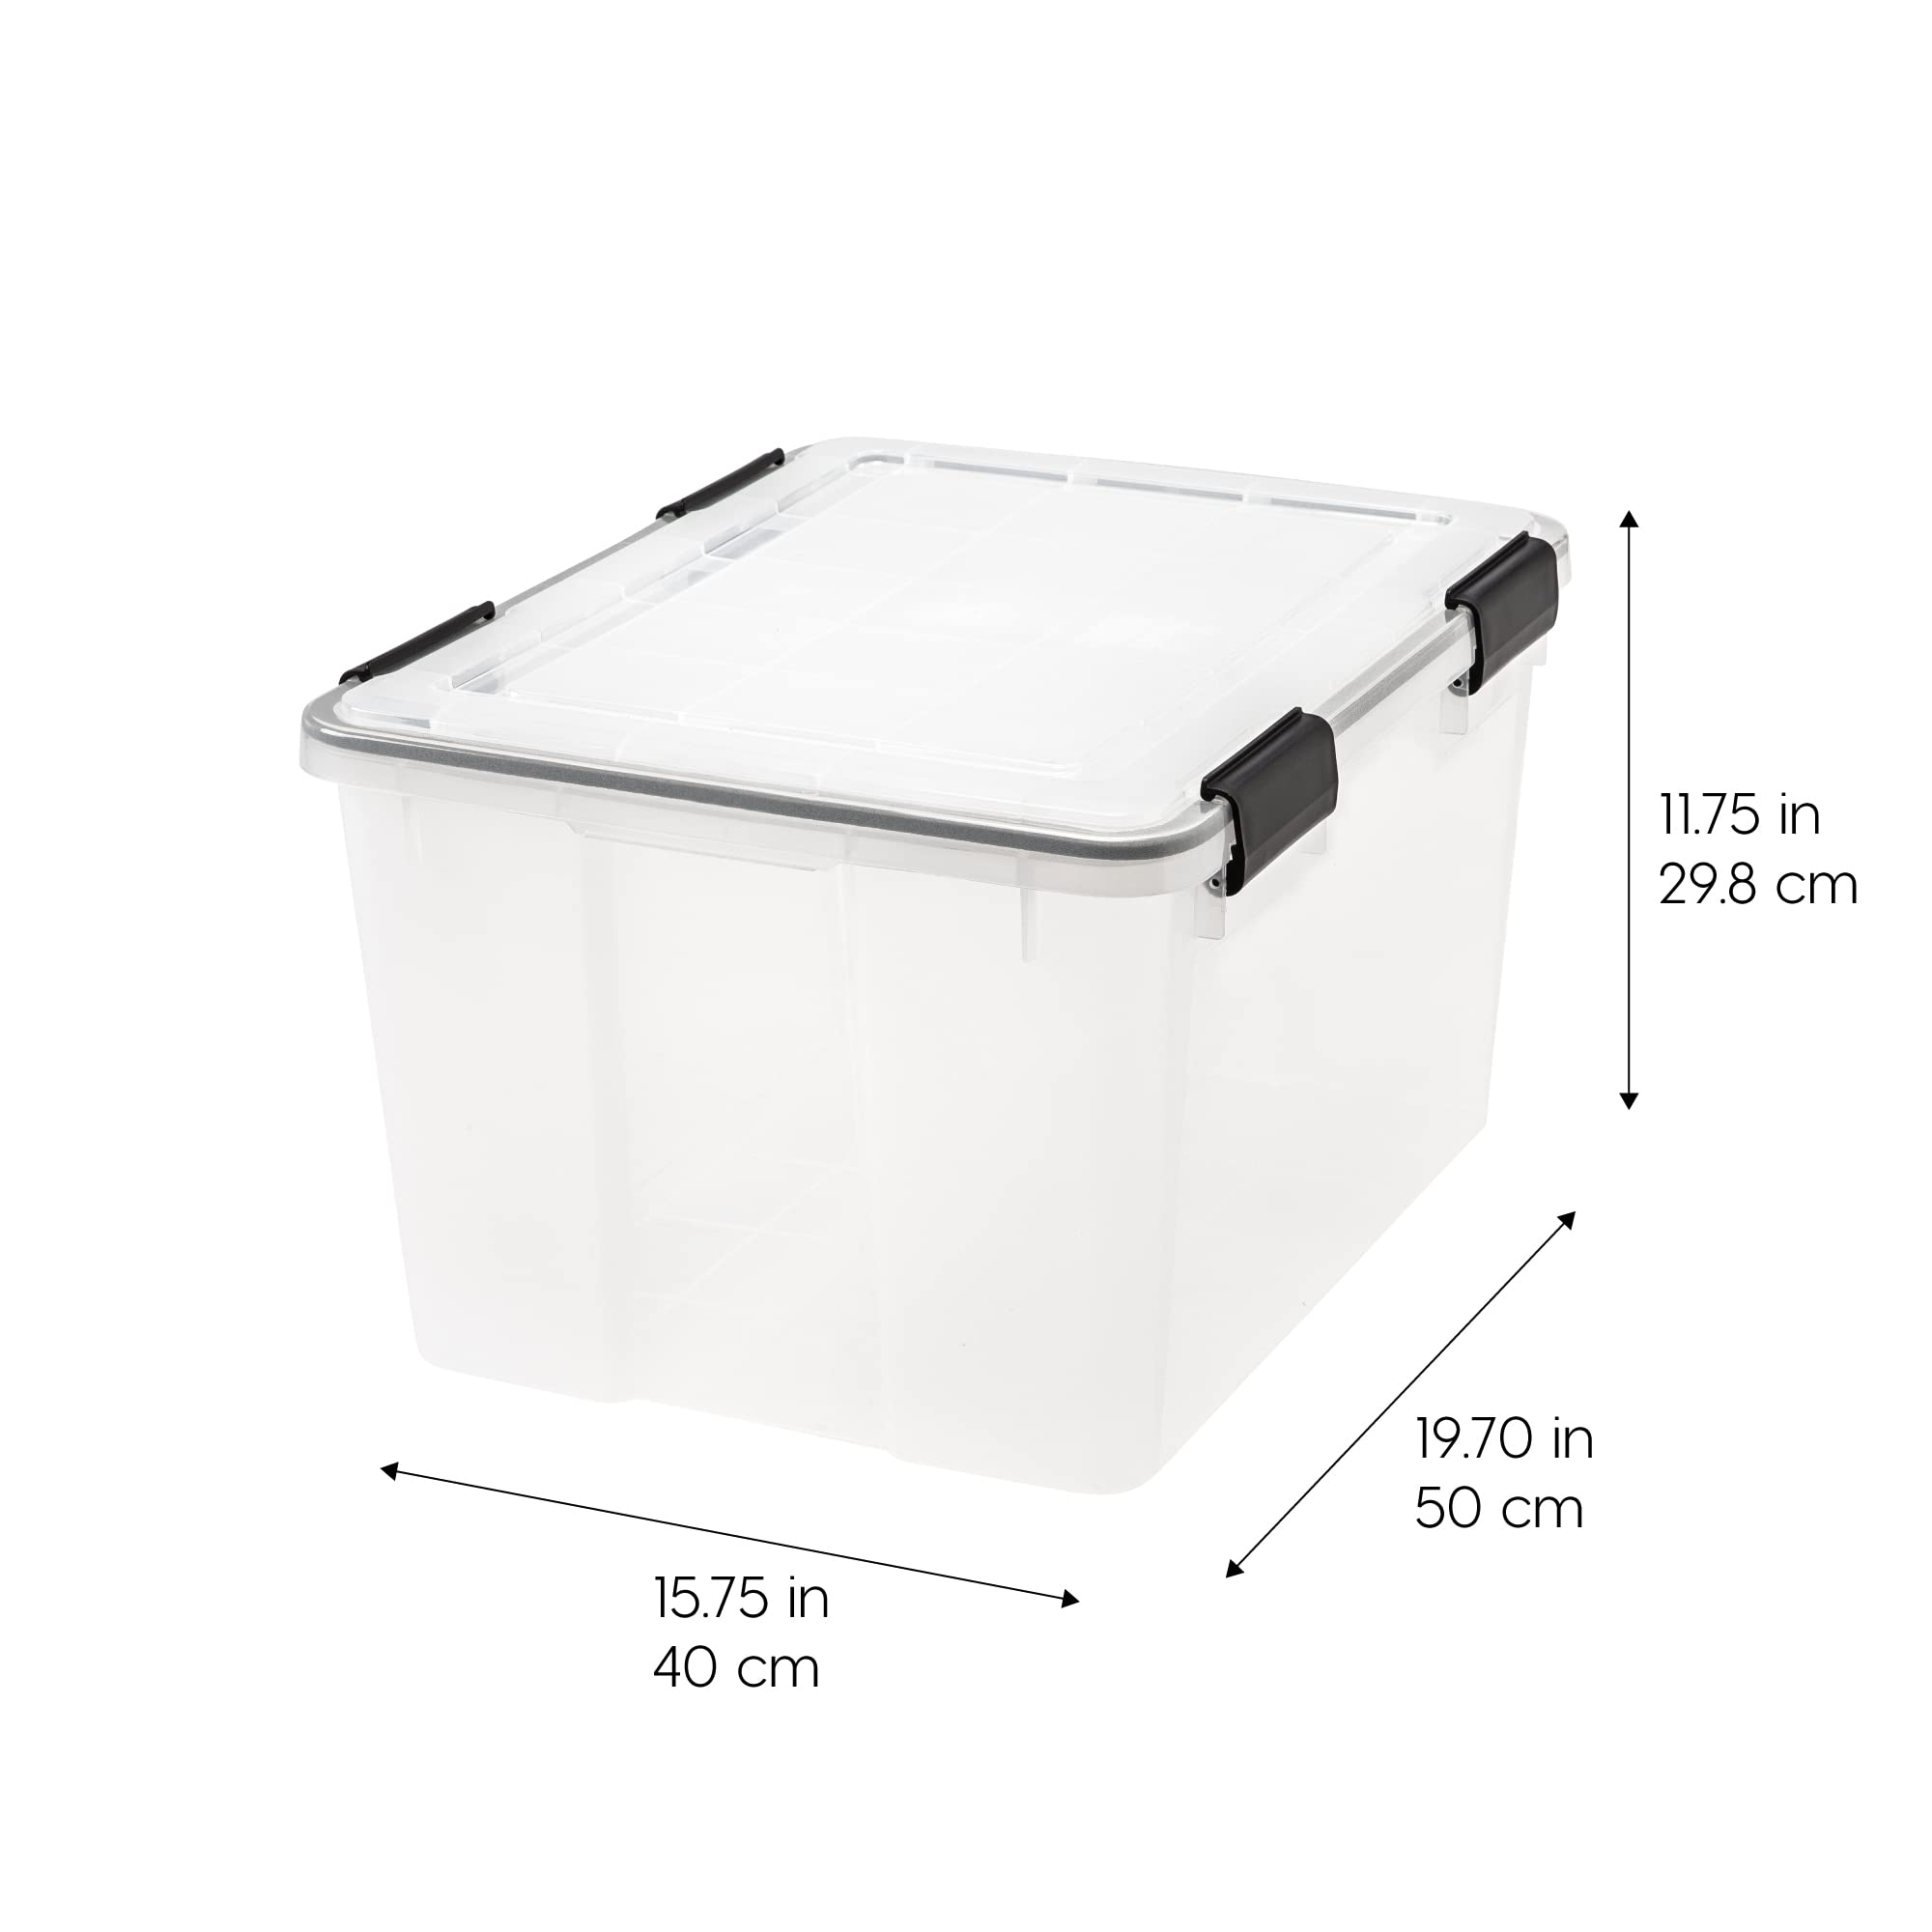 IRIS USA WEATHERPRO 47 Quart Stackable Storage Box with Airtight Gasket Seal Lid, Heavy Duty Containers with Tight Latches, Weather proof Bins for Closet Basement Attic, 2 Pack - Clear/Black